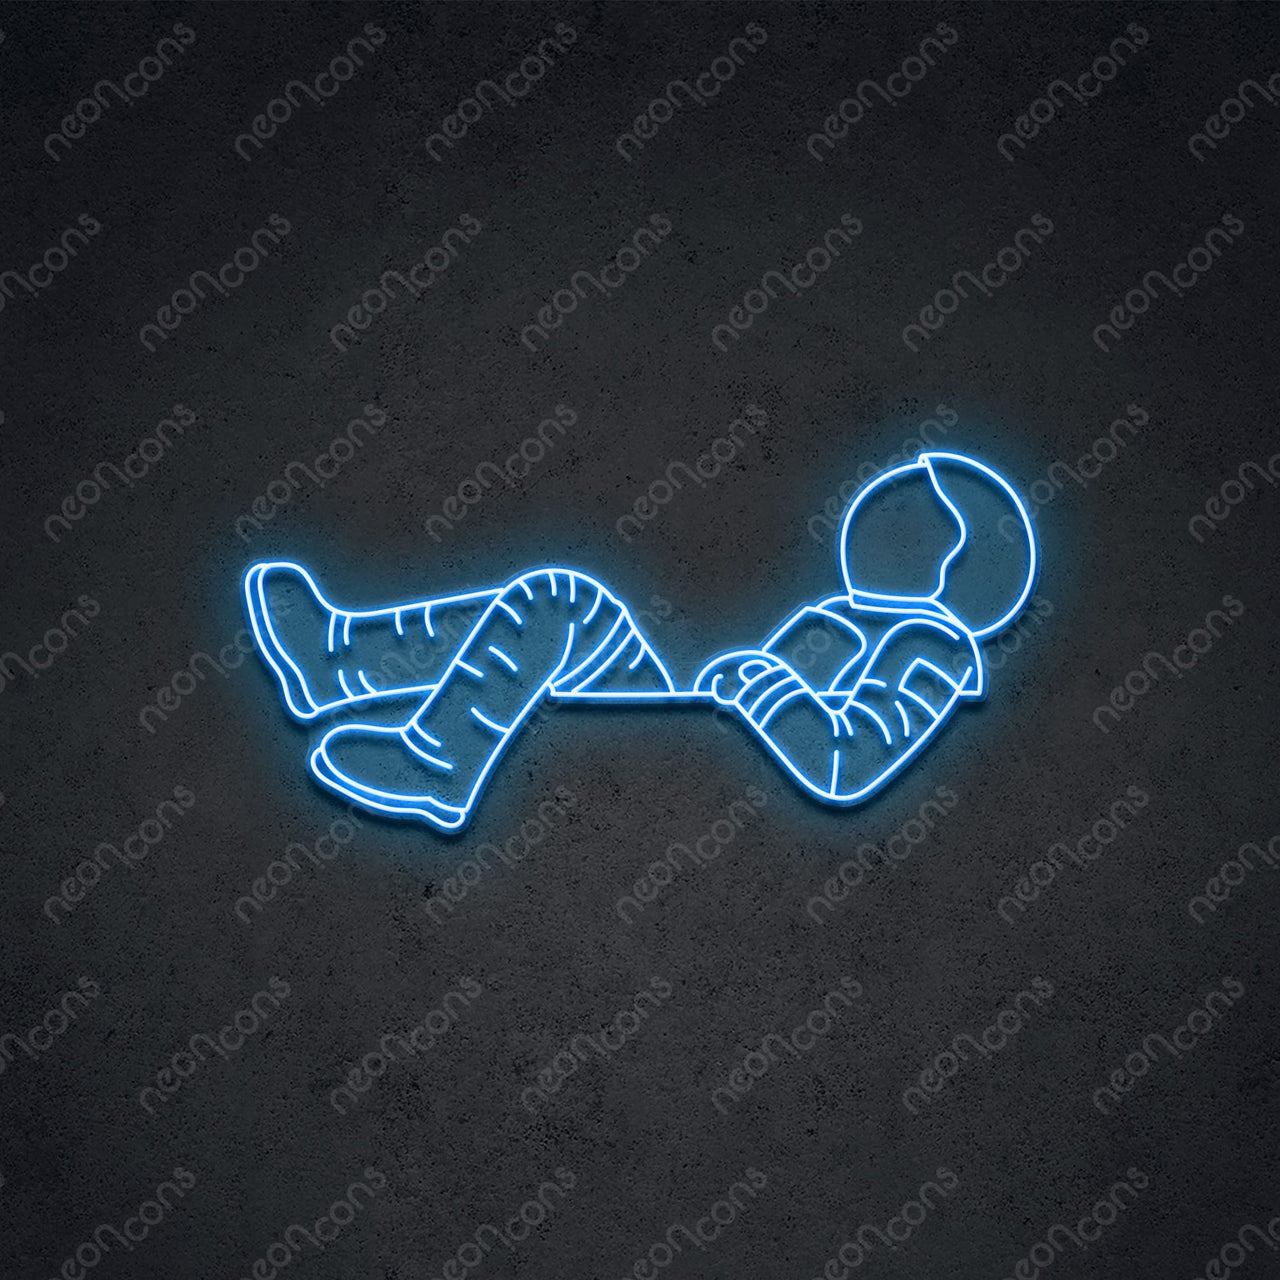 "Lost in Space" LED Neon Sign 60cm (2ft) / Ice Blue / LED Neon by Neon Icons